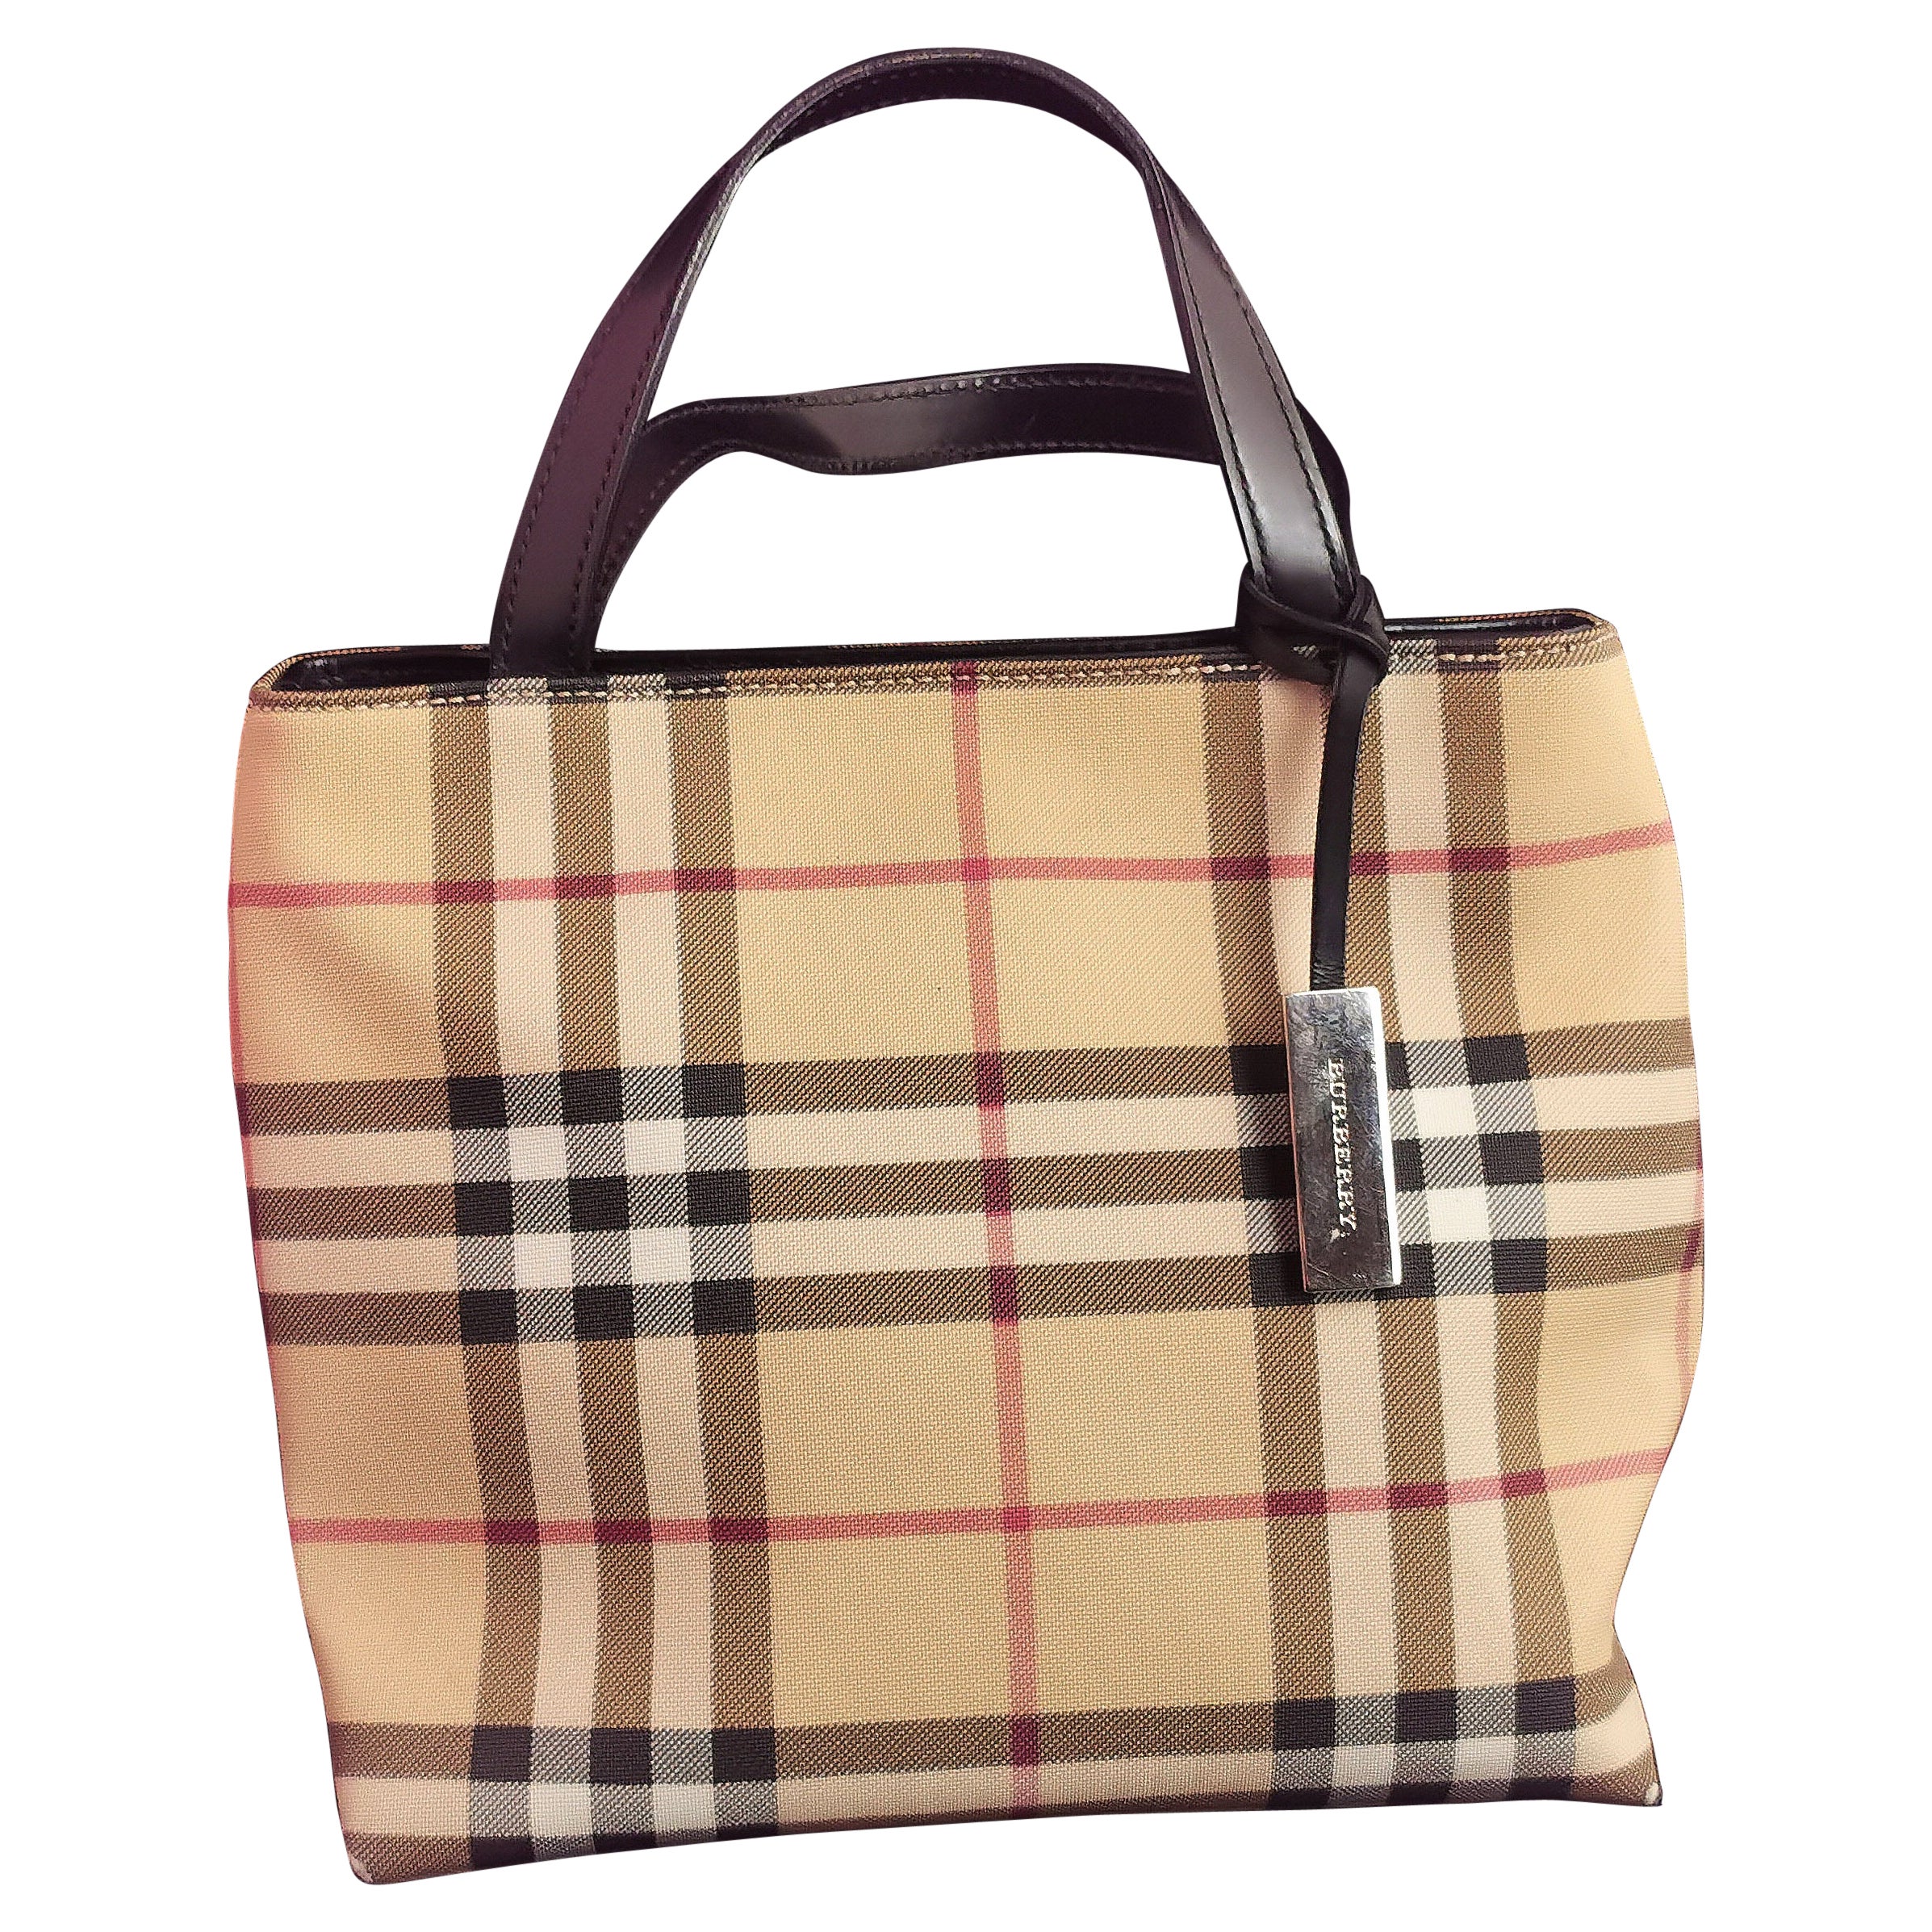 Cheap >burberry old style bags big sale - OFF 76%